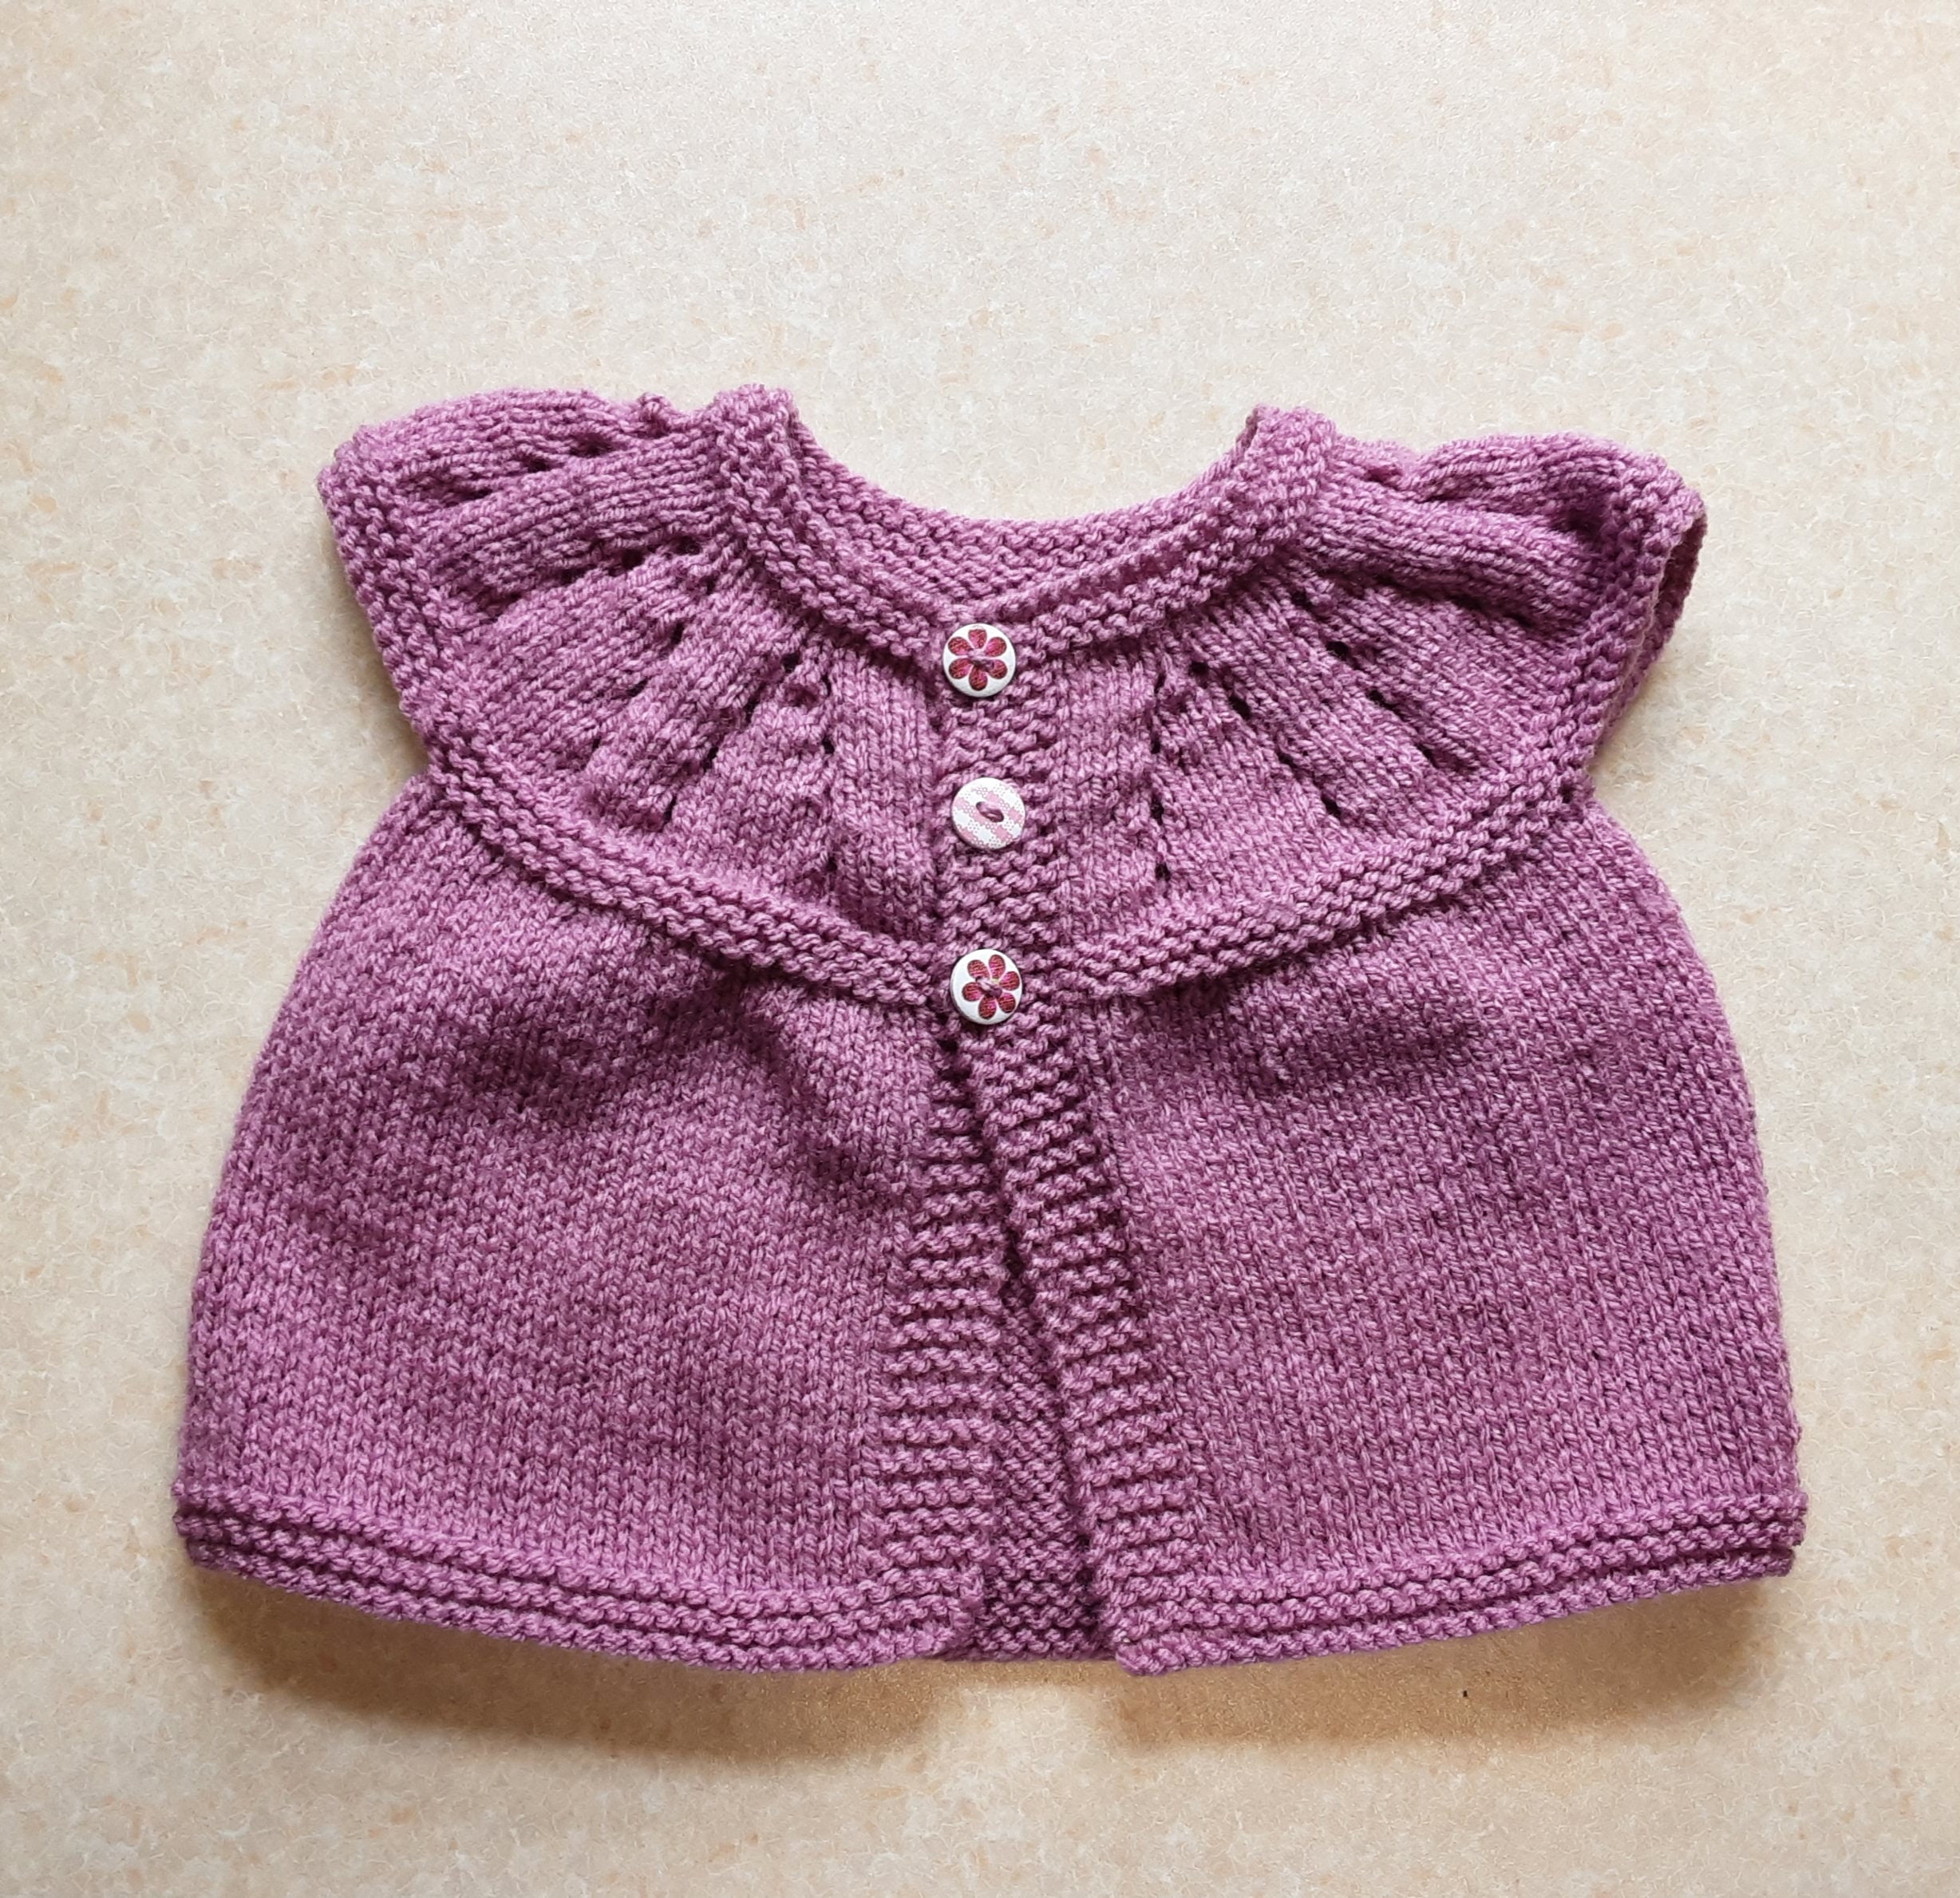 Baby cardigan. Hand knit. 3-6 months. Mauve pink/purple. | Etsy